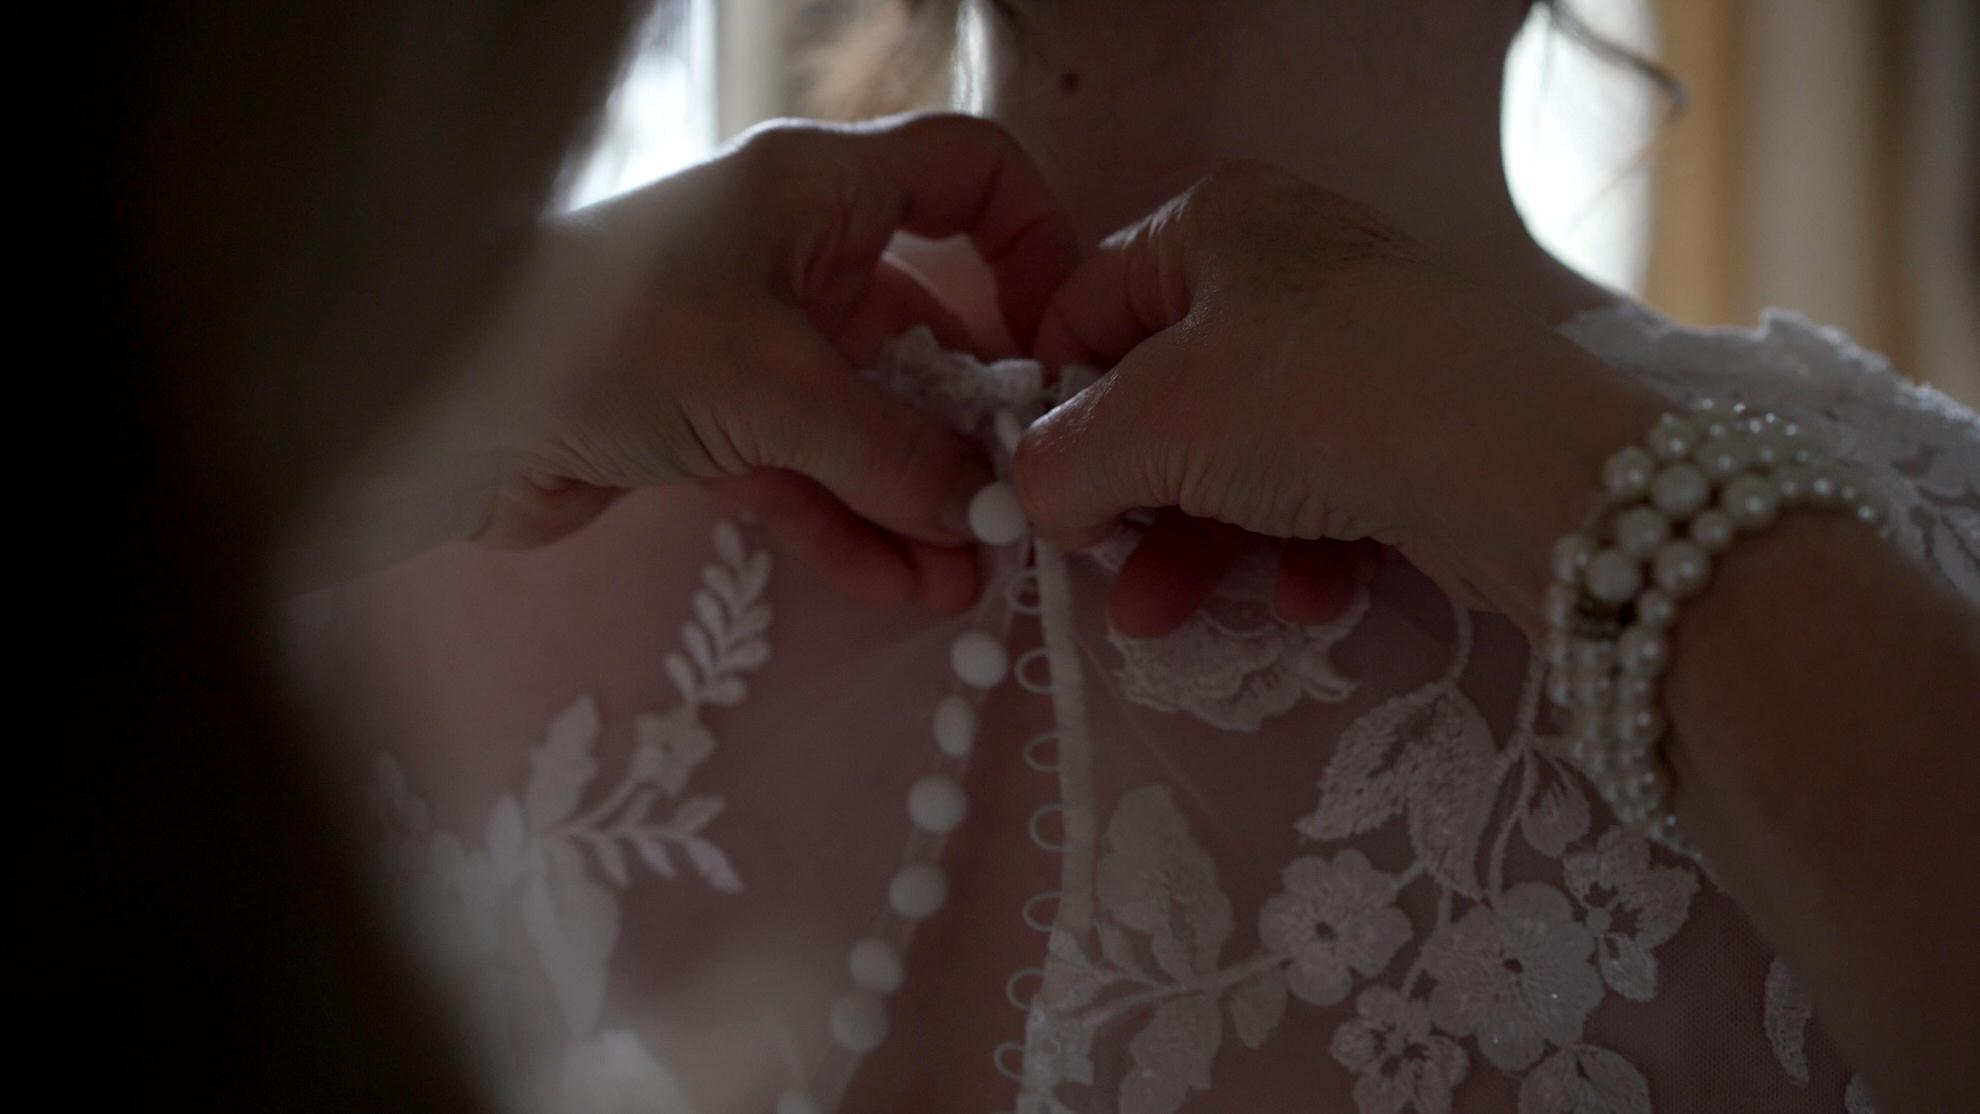 close up video of buttons on a wedding dress